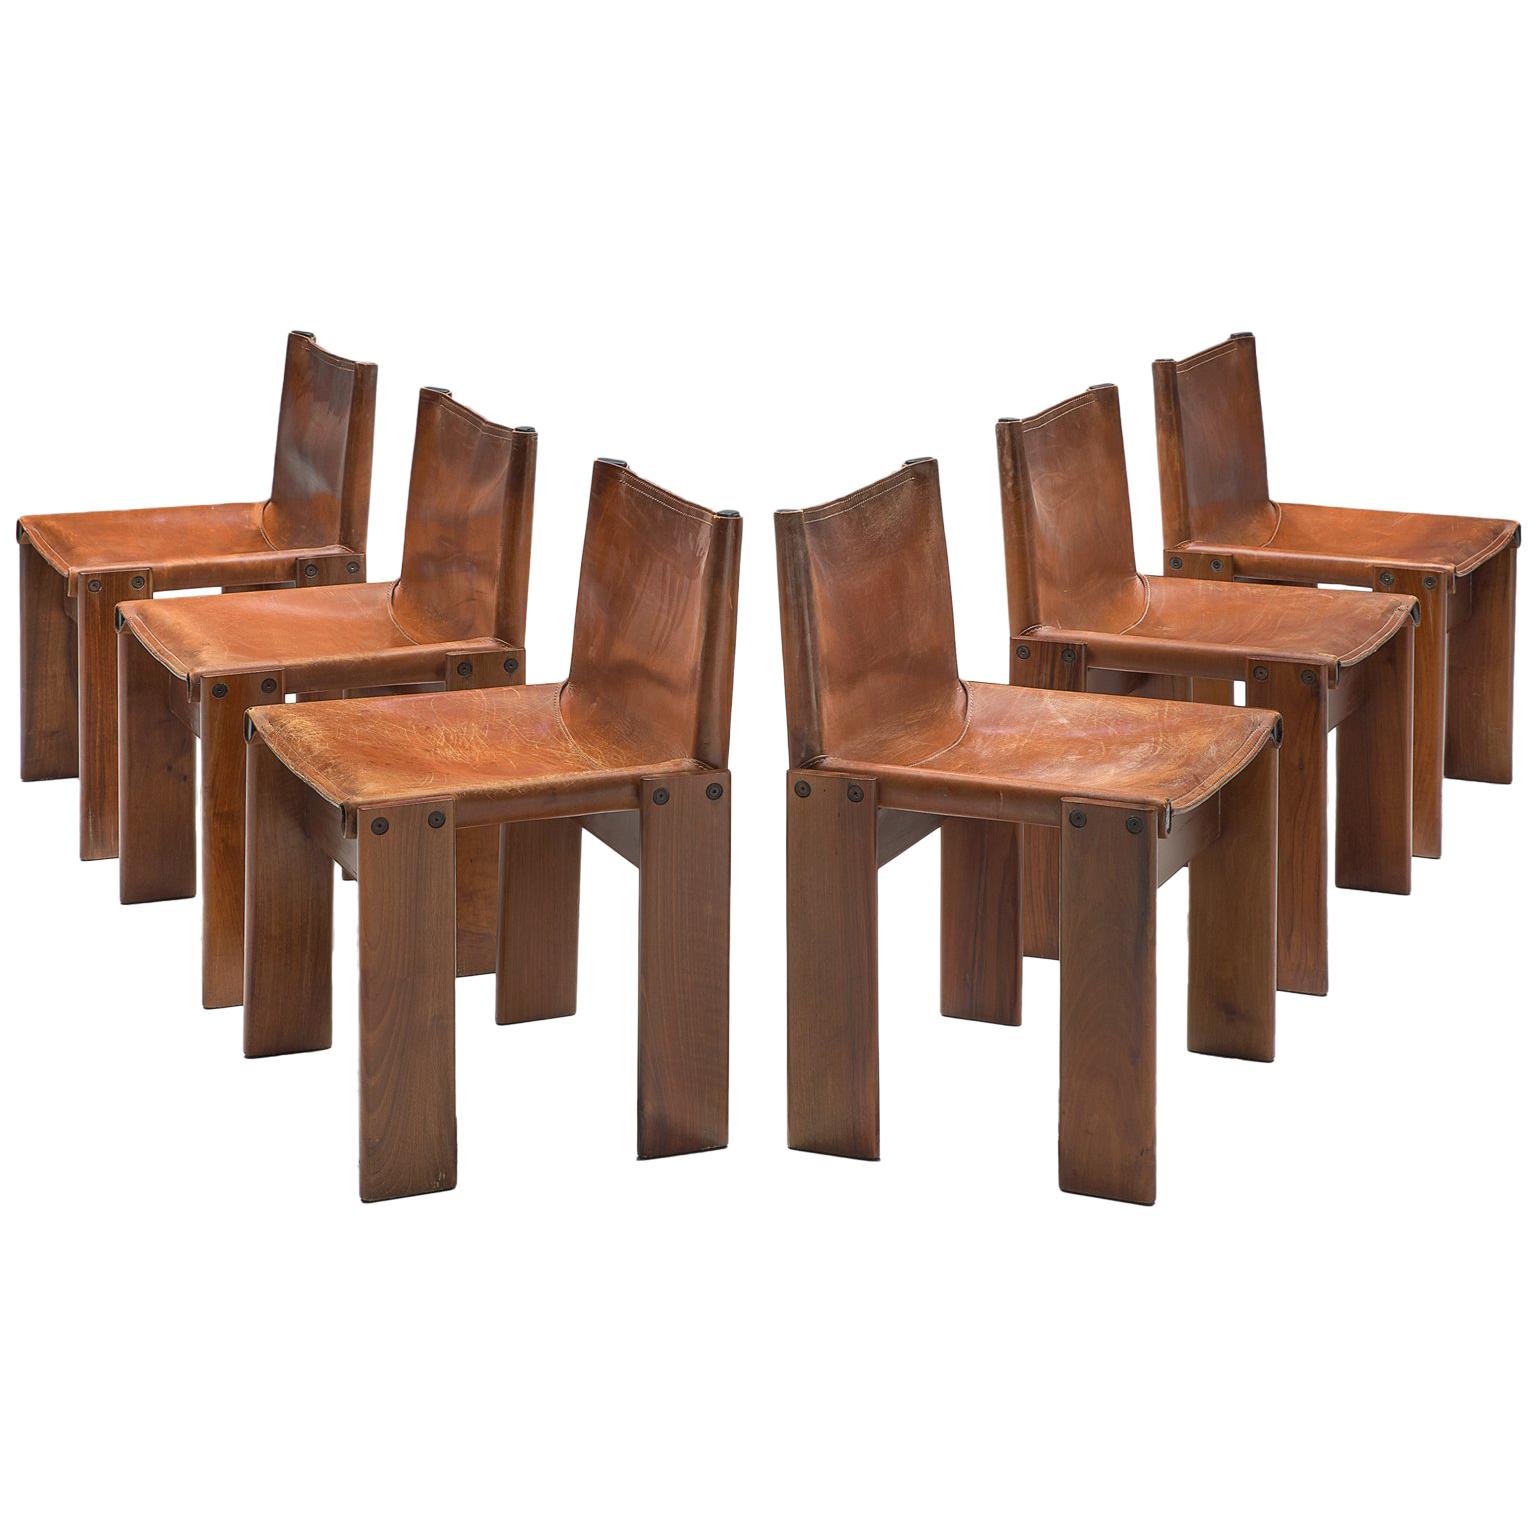 Afra & Tobia Scarpa Set of Six Monk Chairs in Patinated Cognac Leather